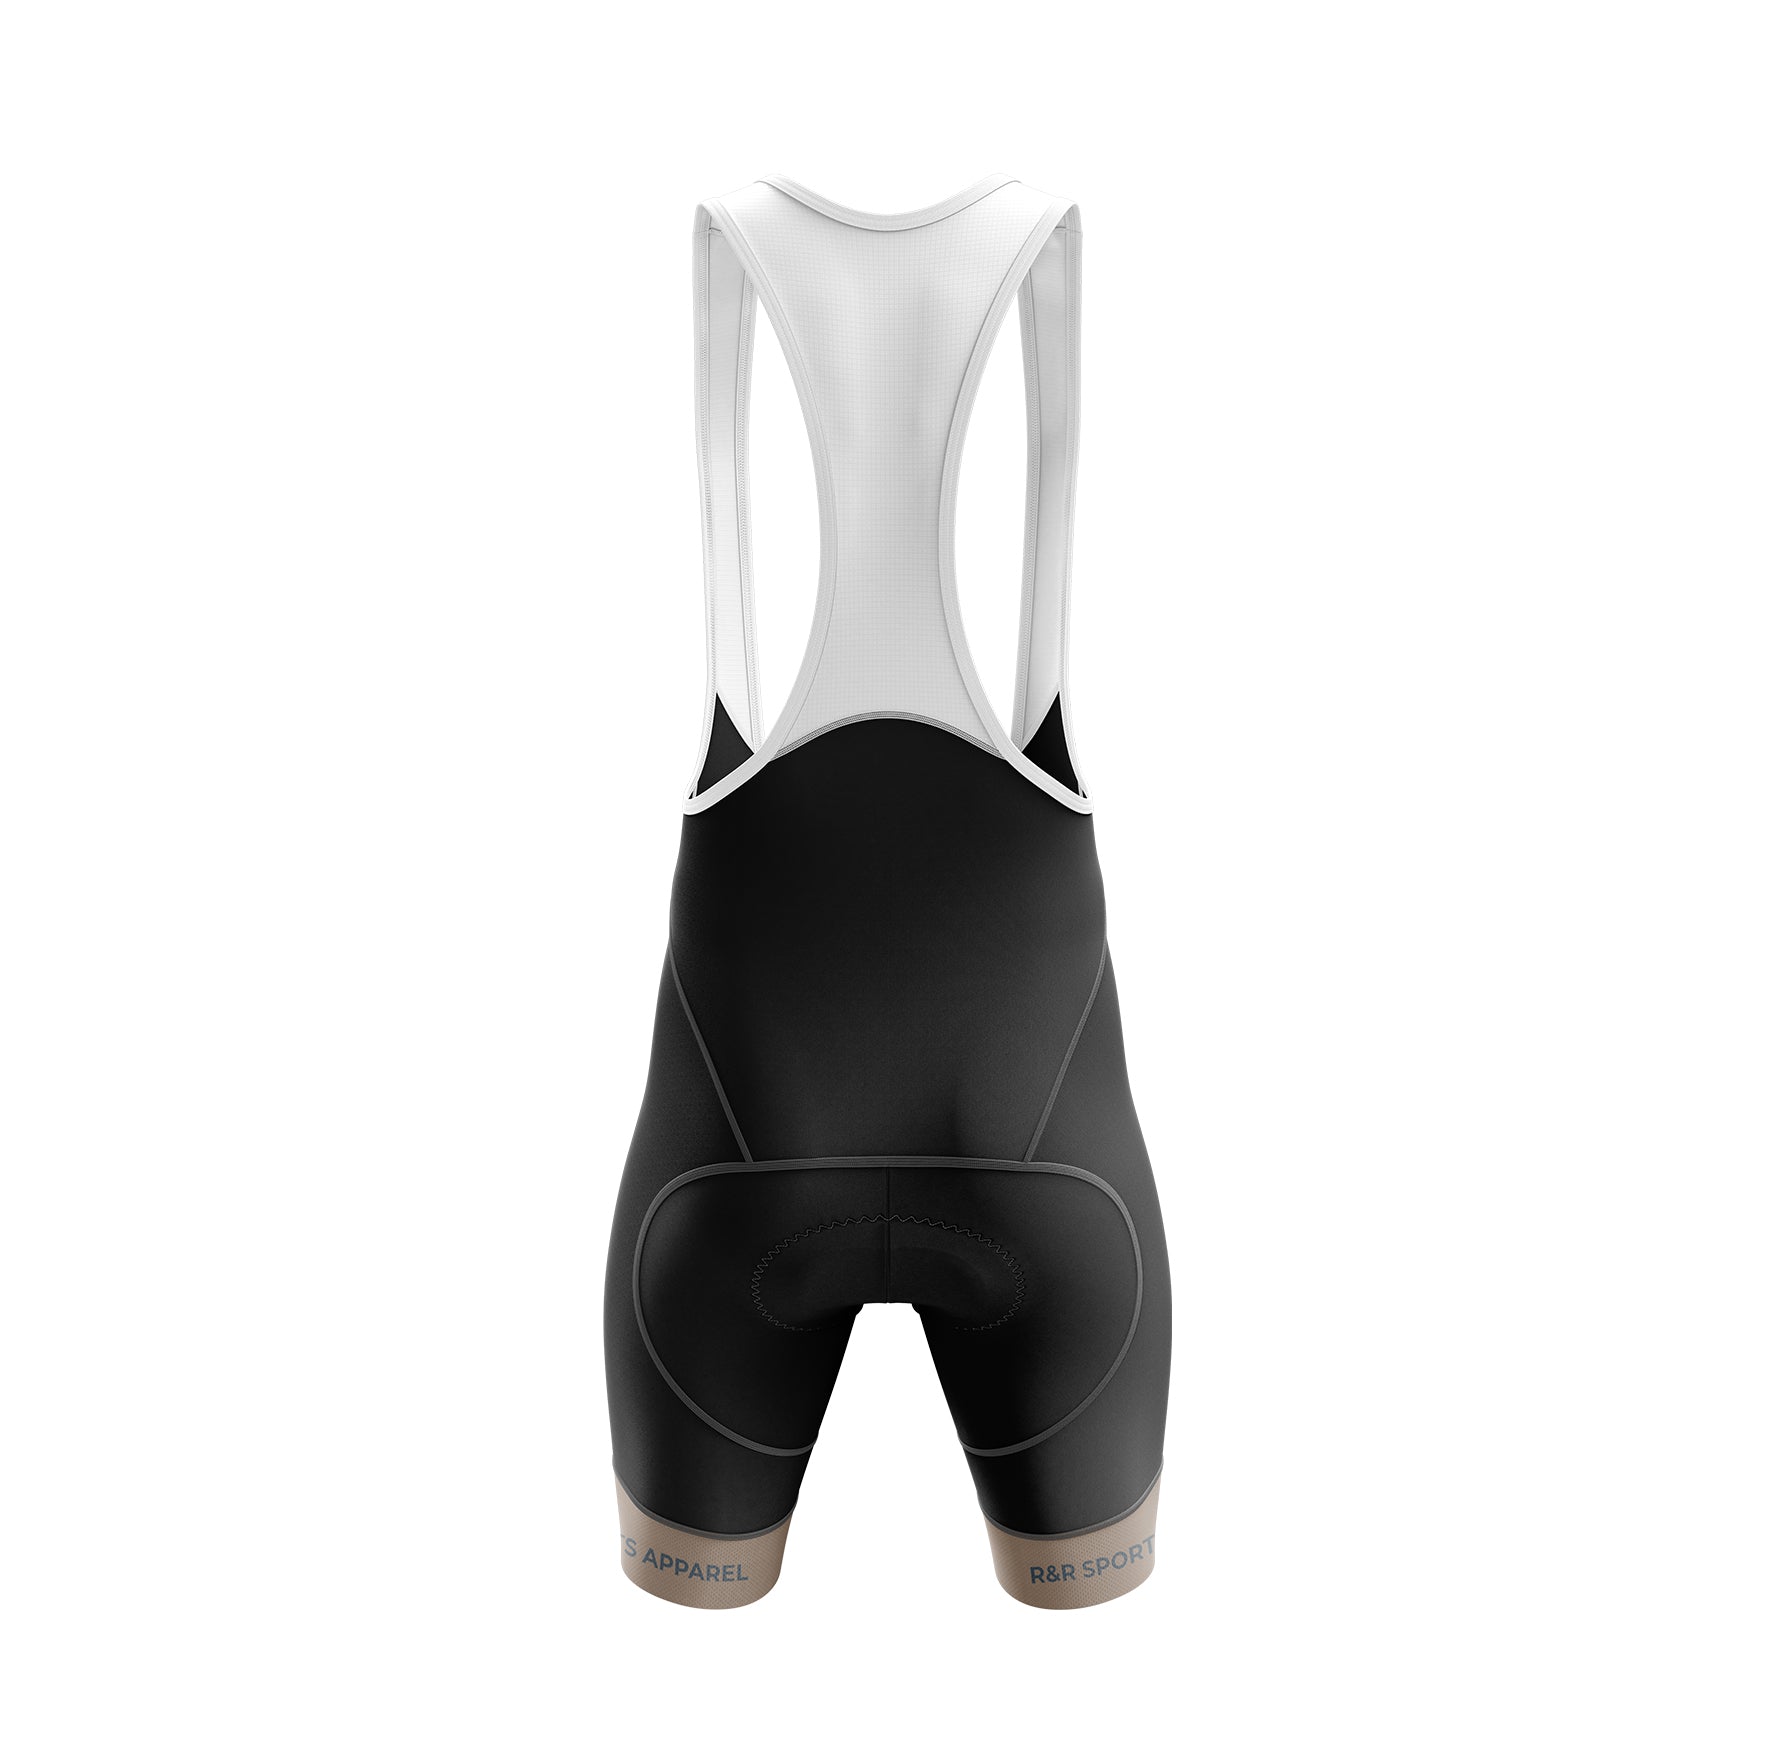 Rodeo Dust Seamless Cycling Jersey - R&R Sports Apparel